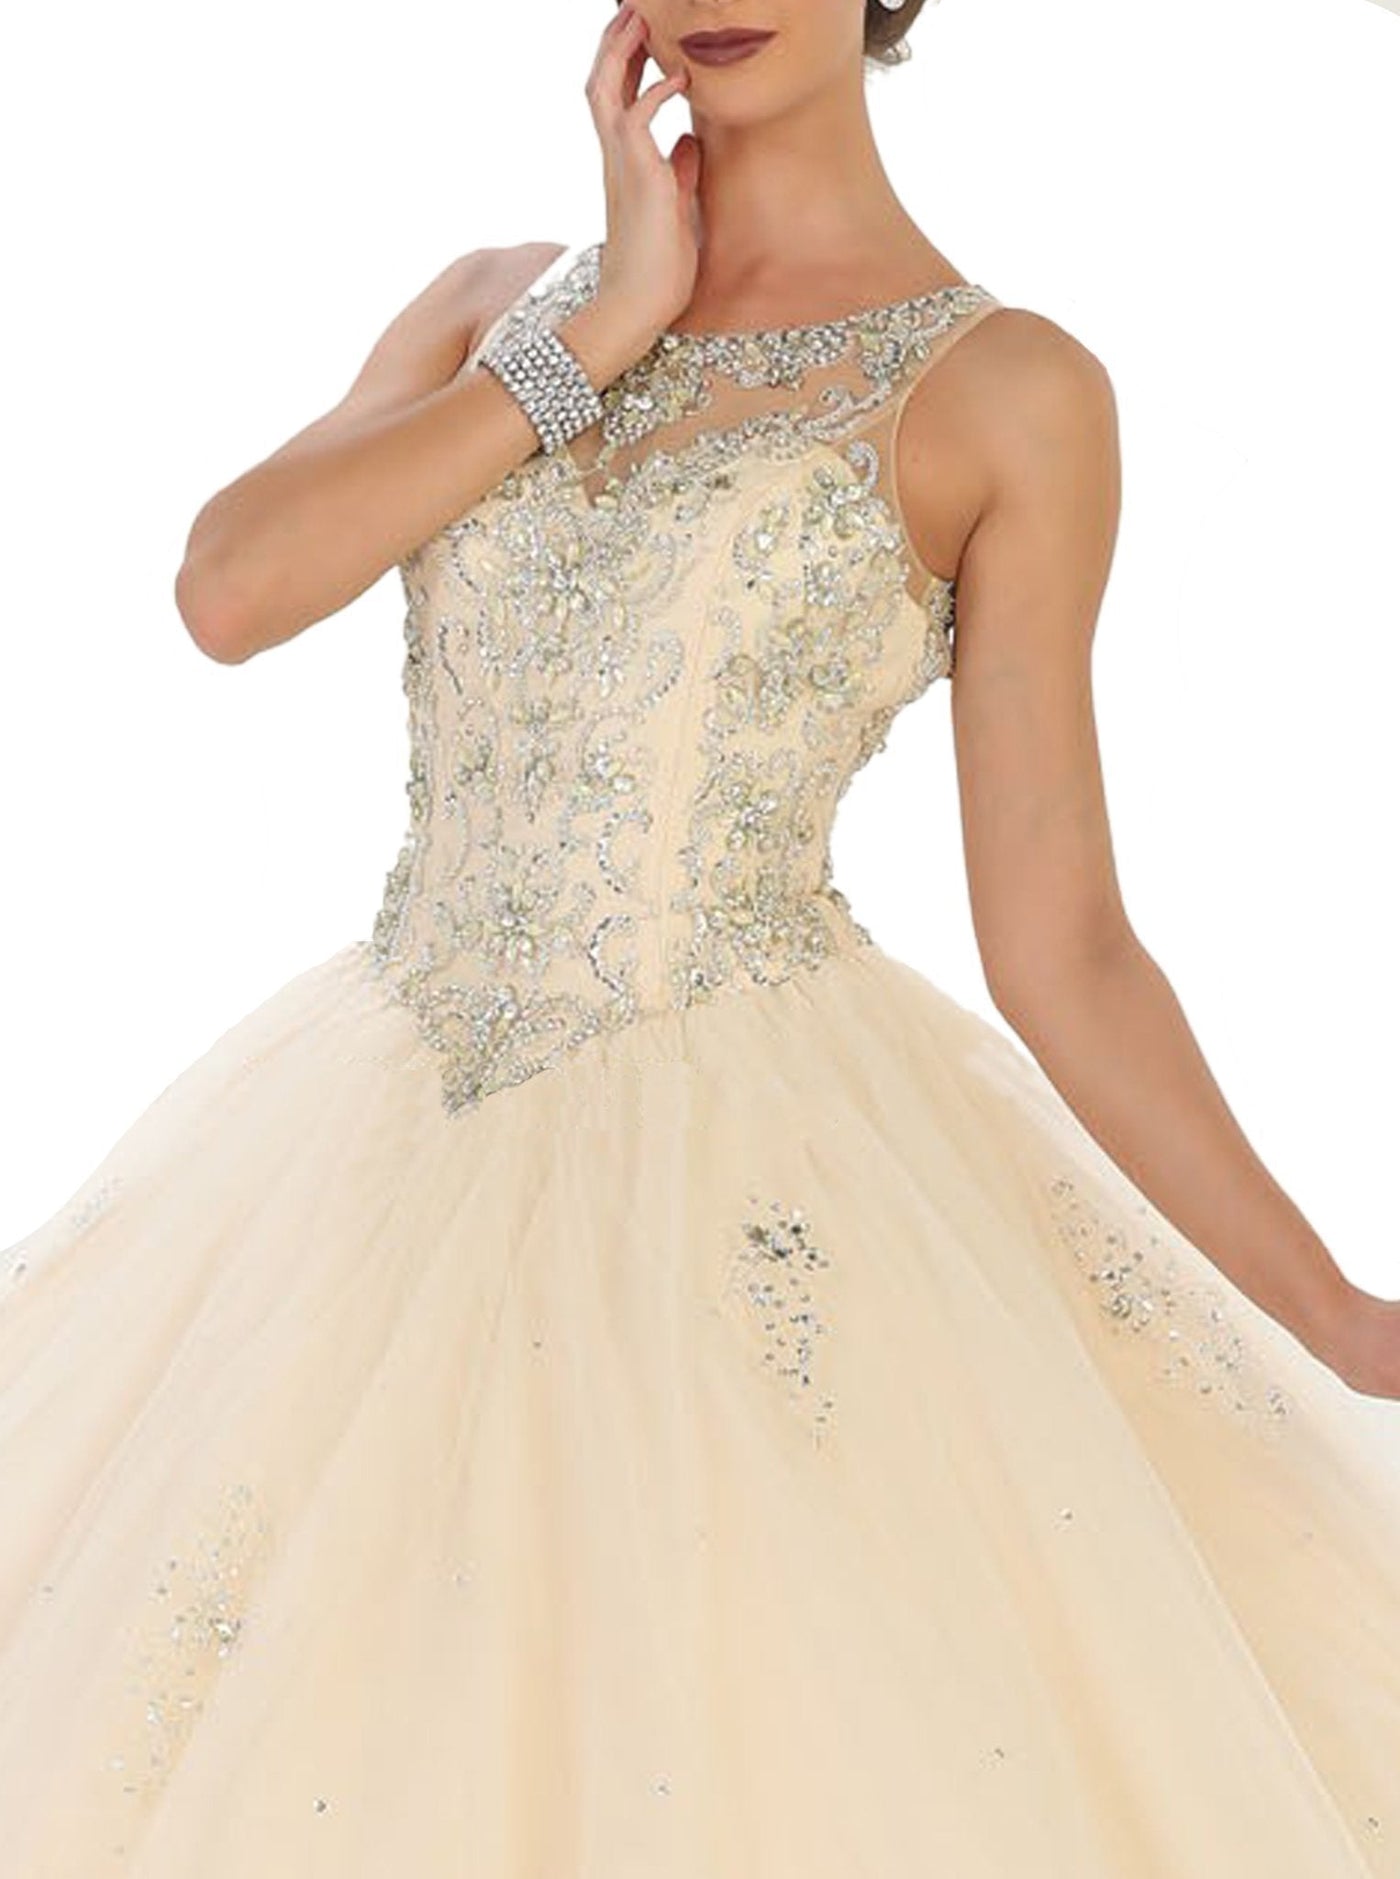 May Queen - Crystal Embellished Jewel Quinceanera Ballgown Quinceanera Dresses